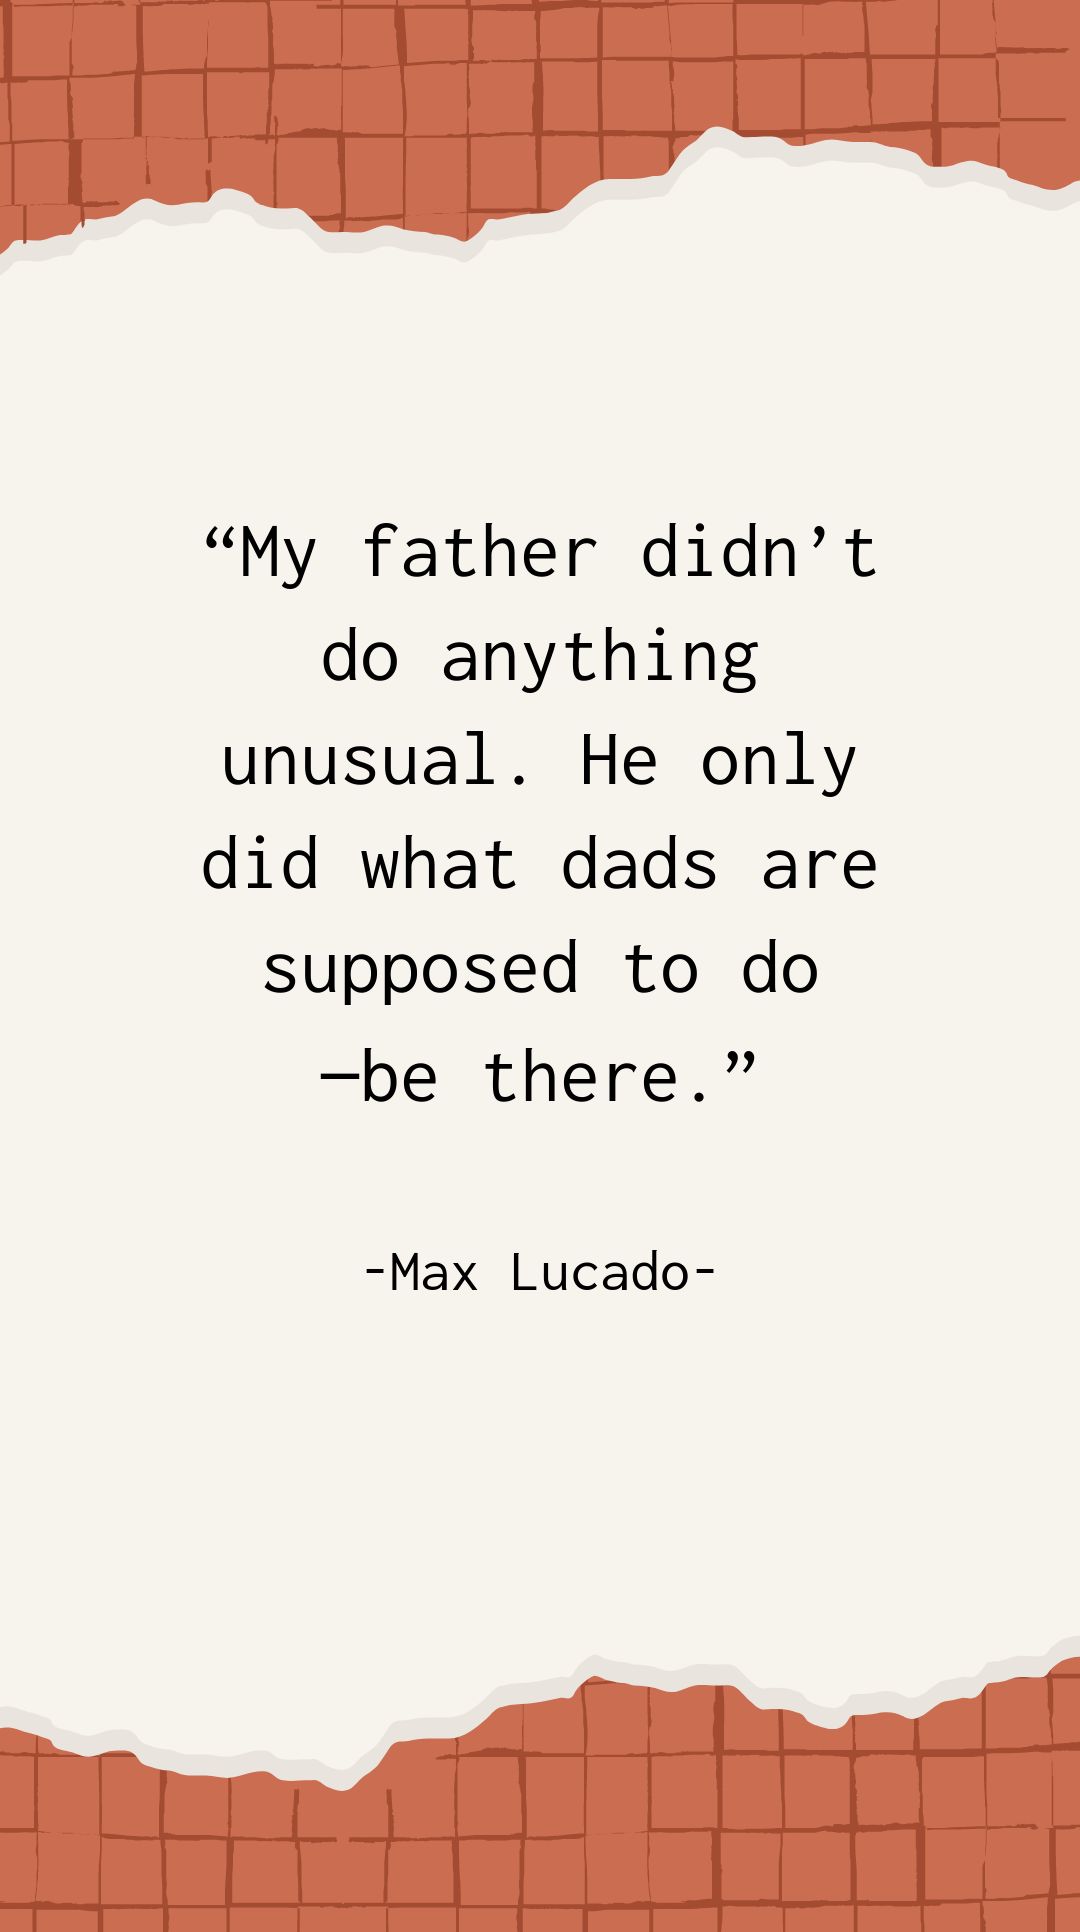 Max Lucado - My father didn’t do anything unusual. He only did what dads are supposed to do be there. in JPG